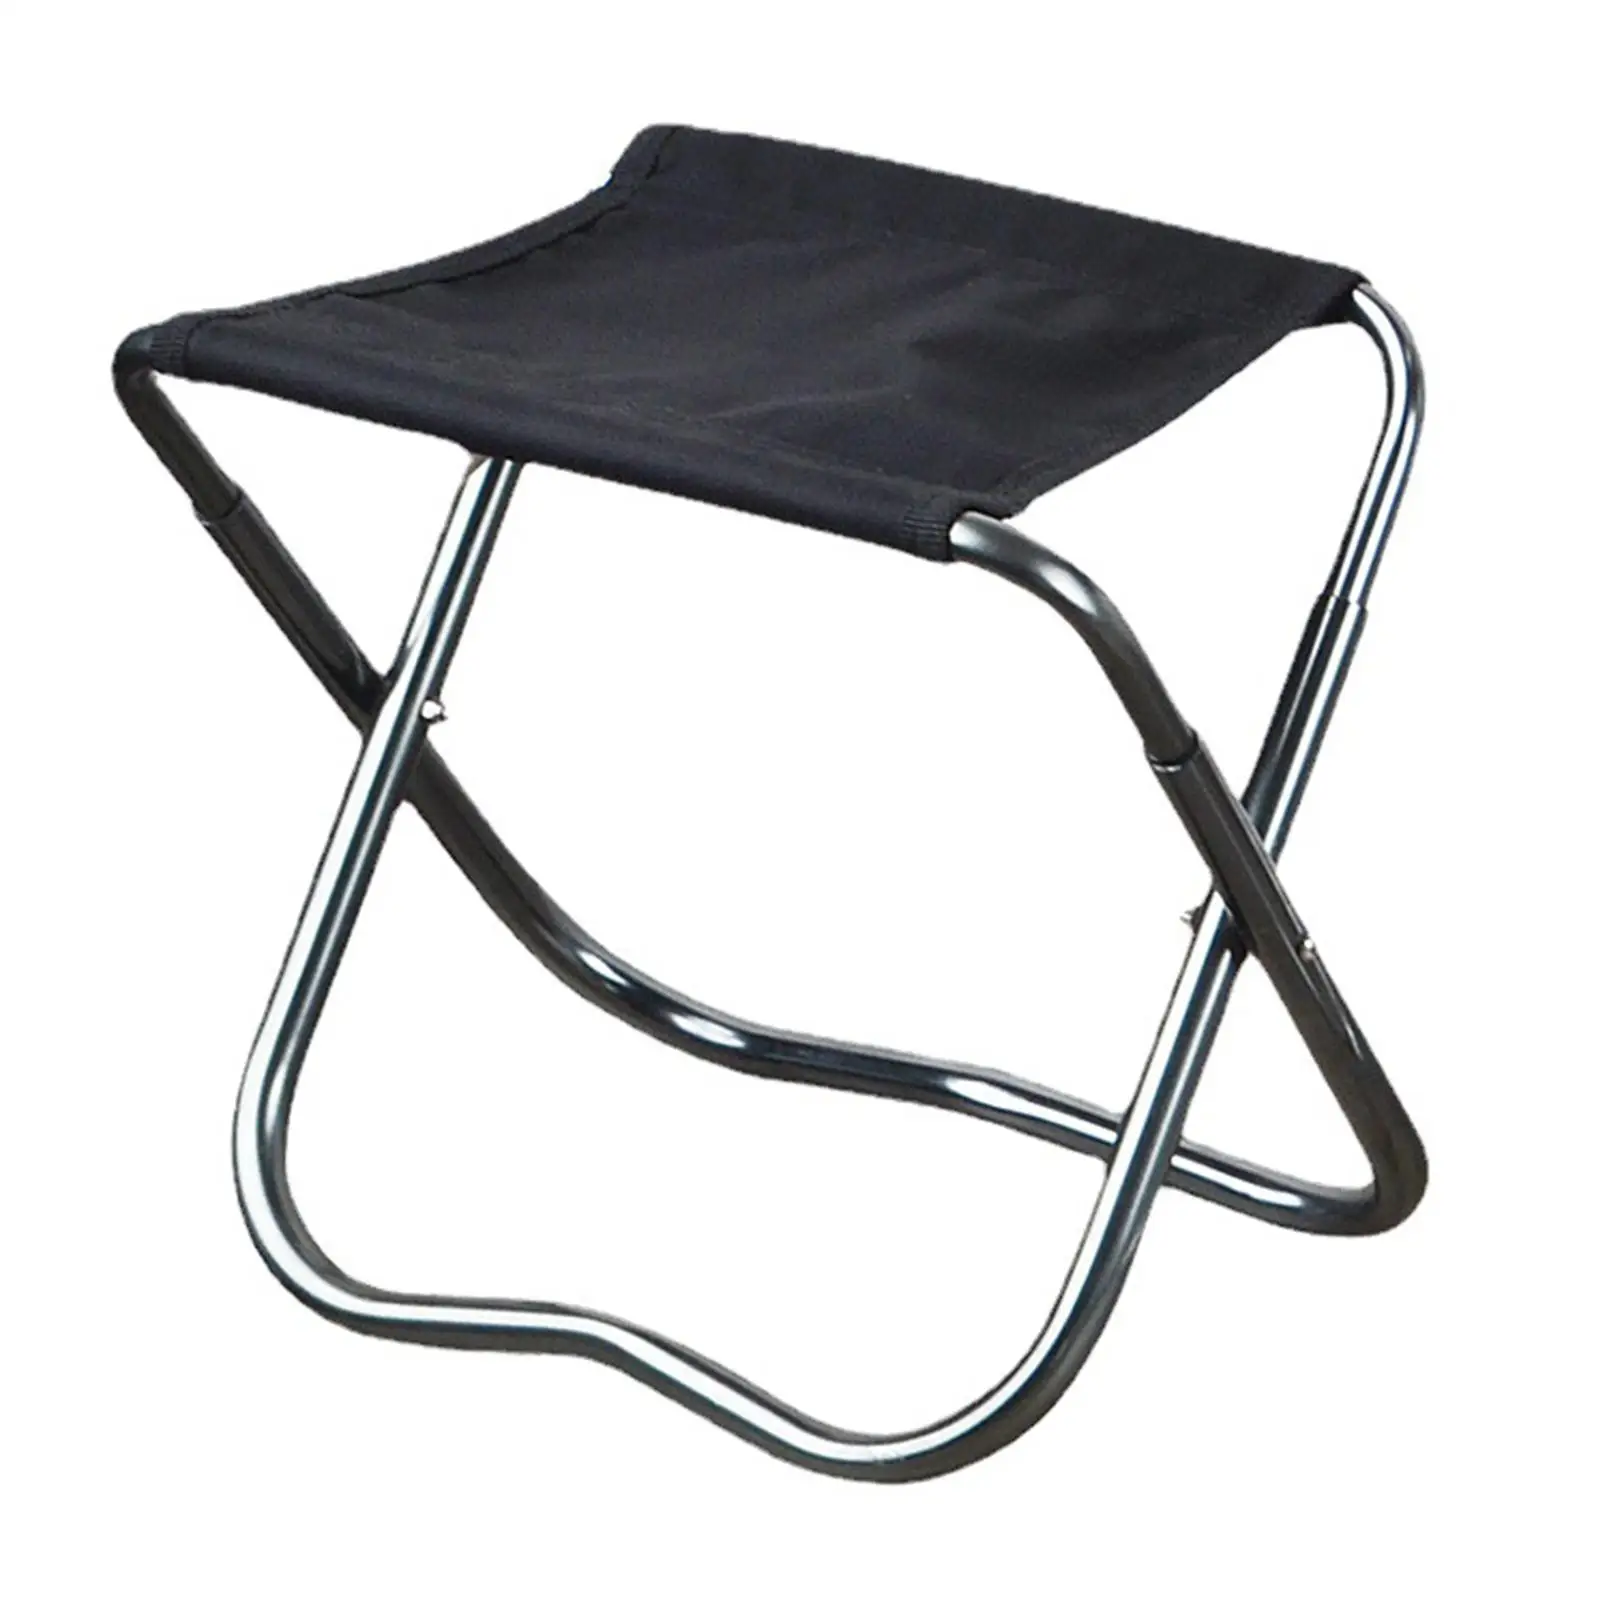 Camping Chair Easy to Carry Outdoor Multipurpose Collapsible Camping Stool Fishing Chair for Barbecue Camping Picnic Lawn Garden